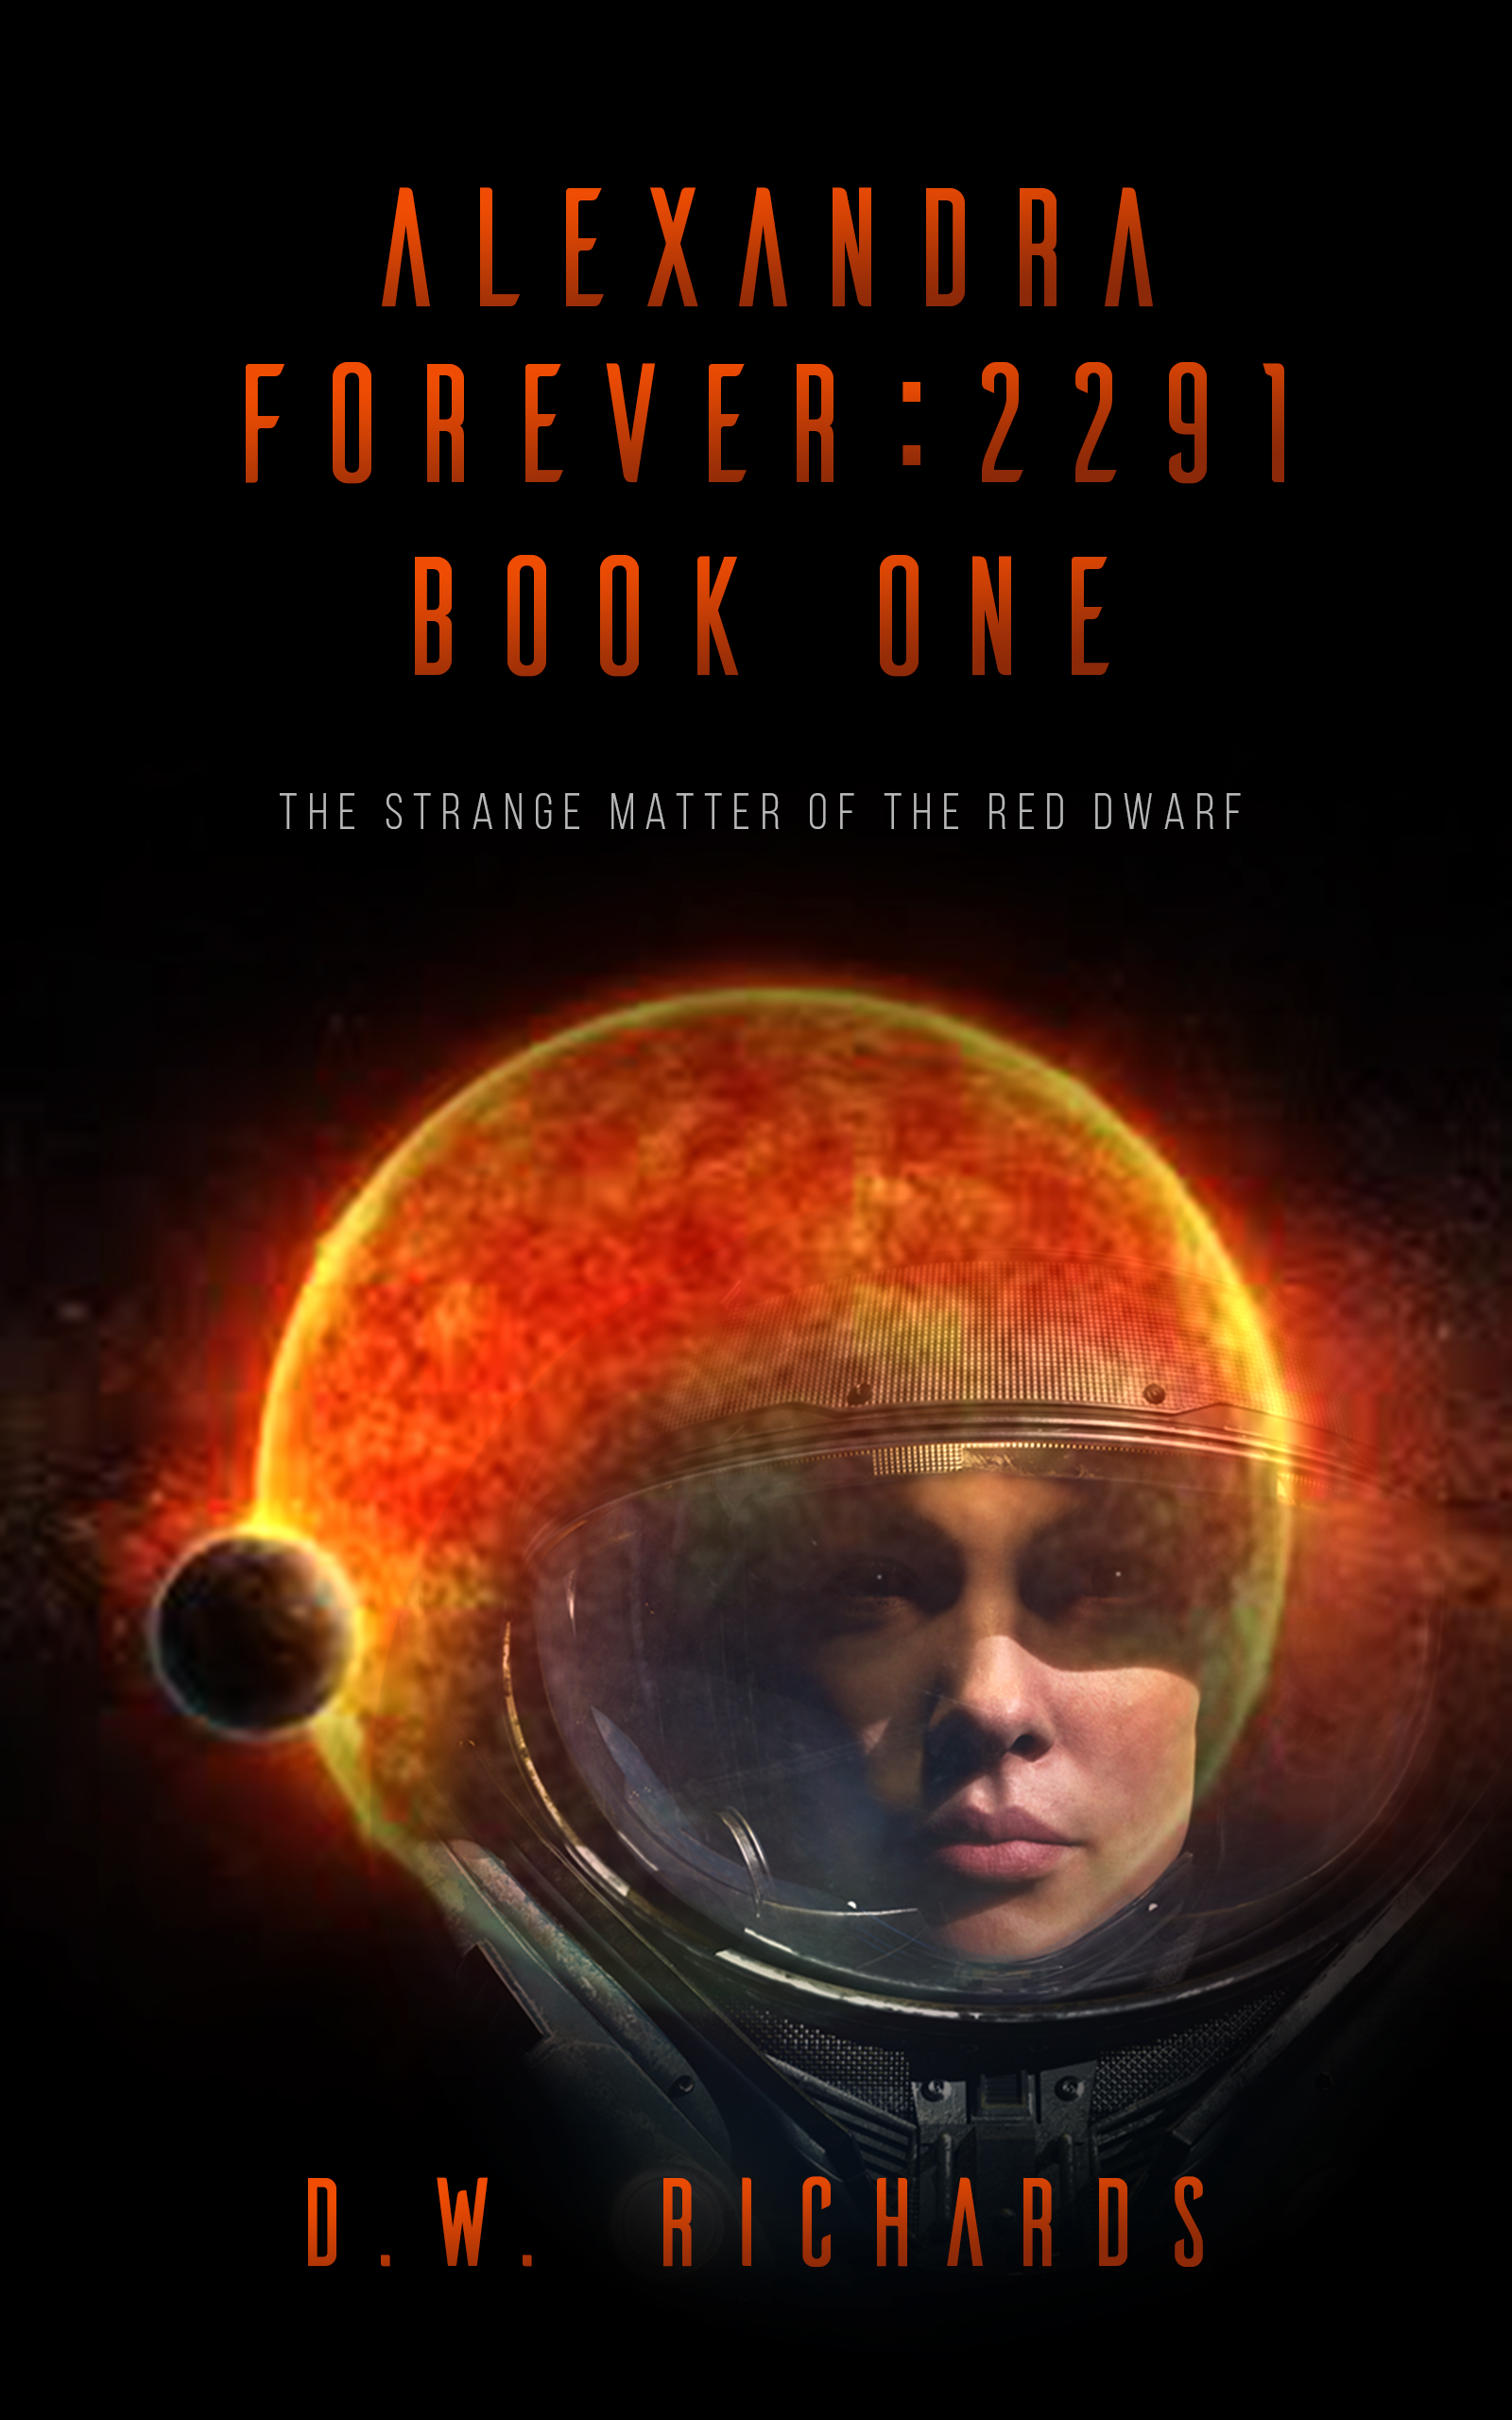 FREE: Alexandra Forever 2291, Book One, The Strange Matter of the Red Dwarf by D.W. Richards